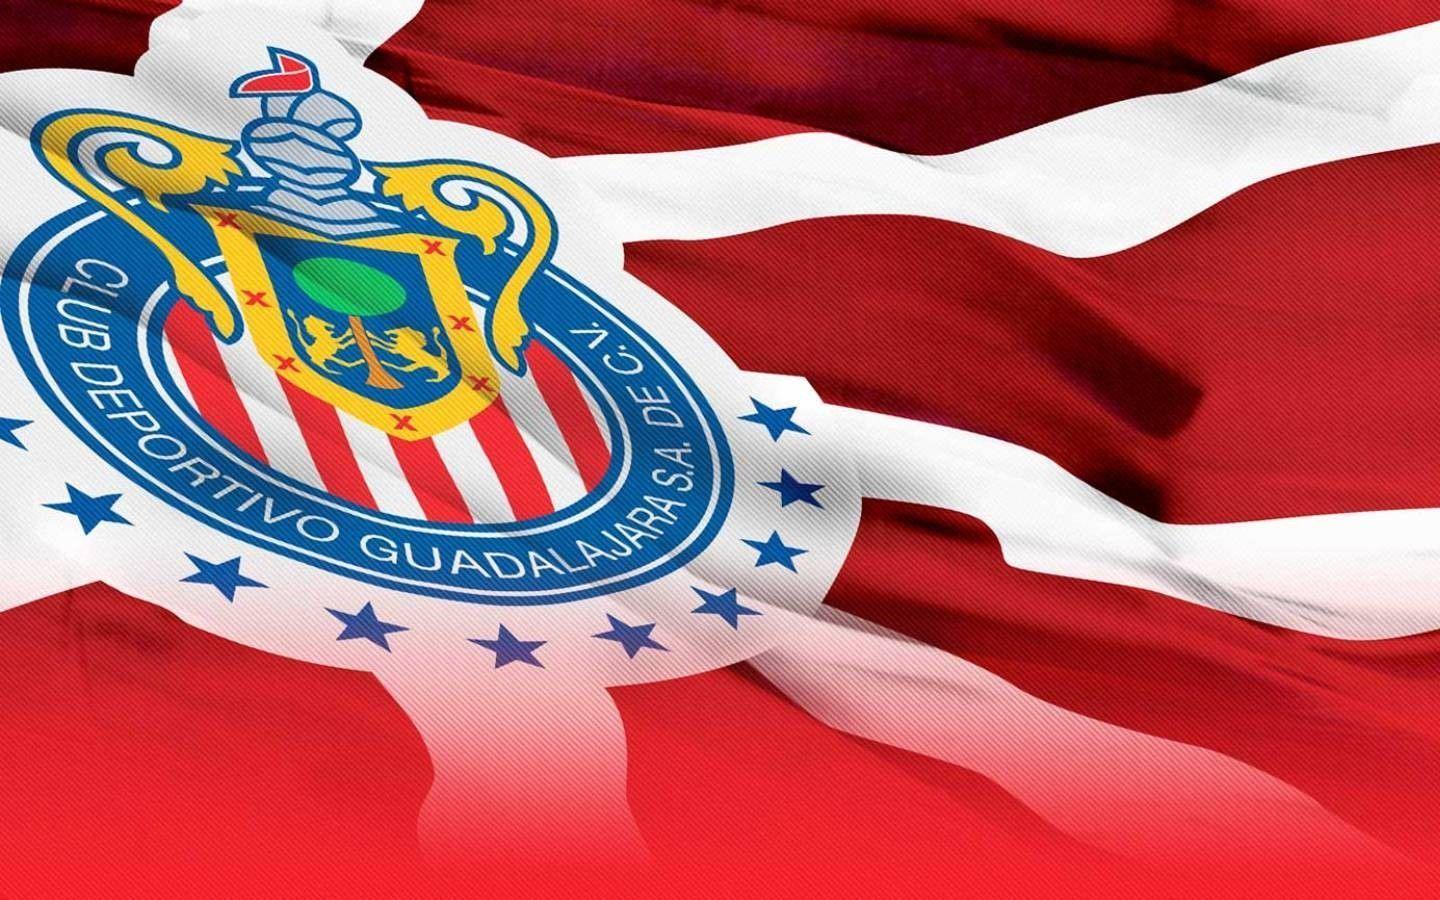 Chivas Team Wallpapers Image & Pictures